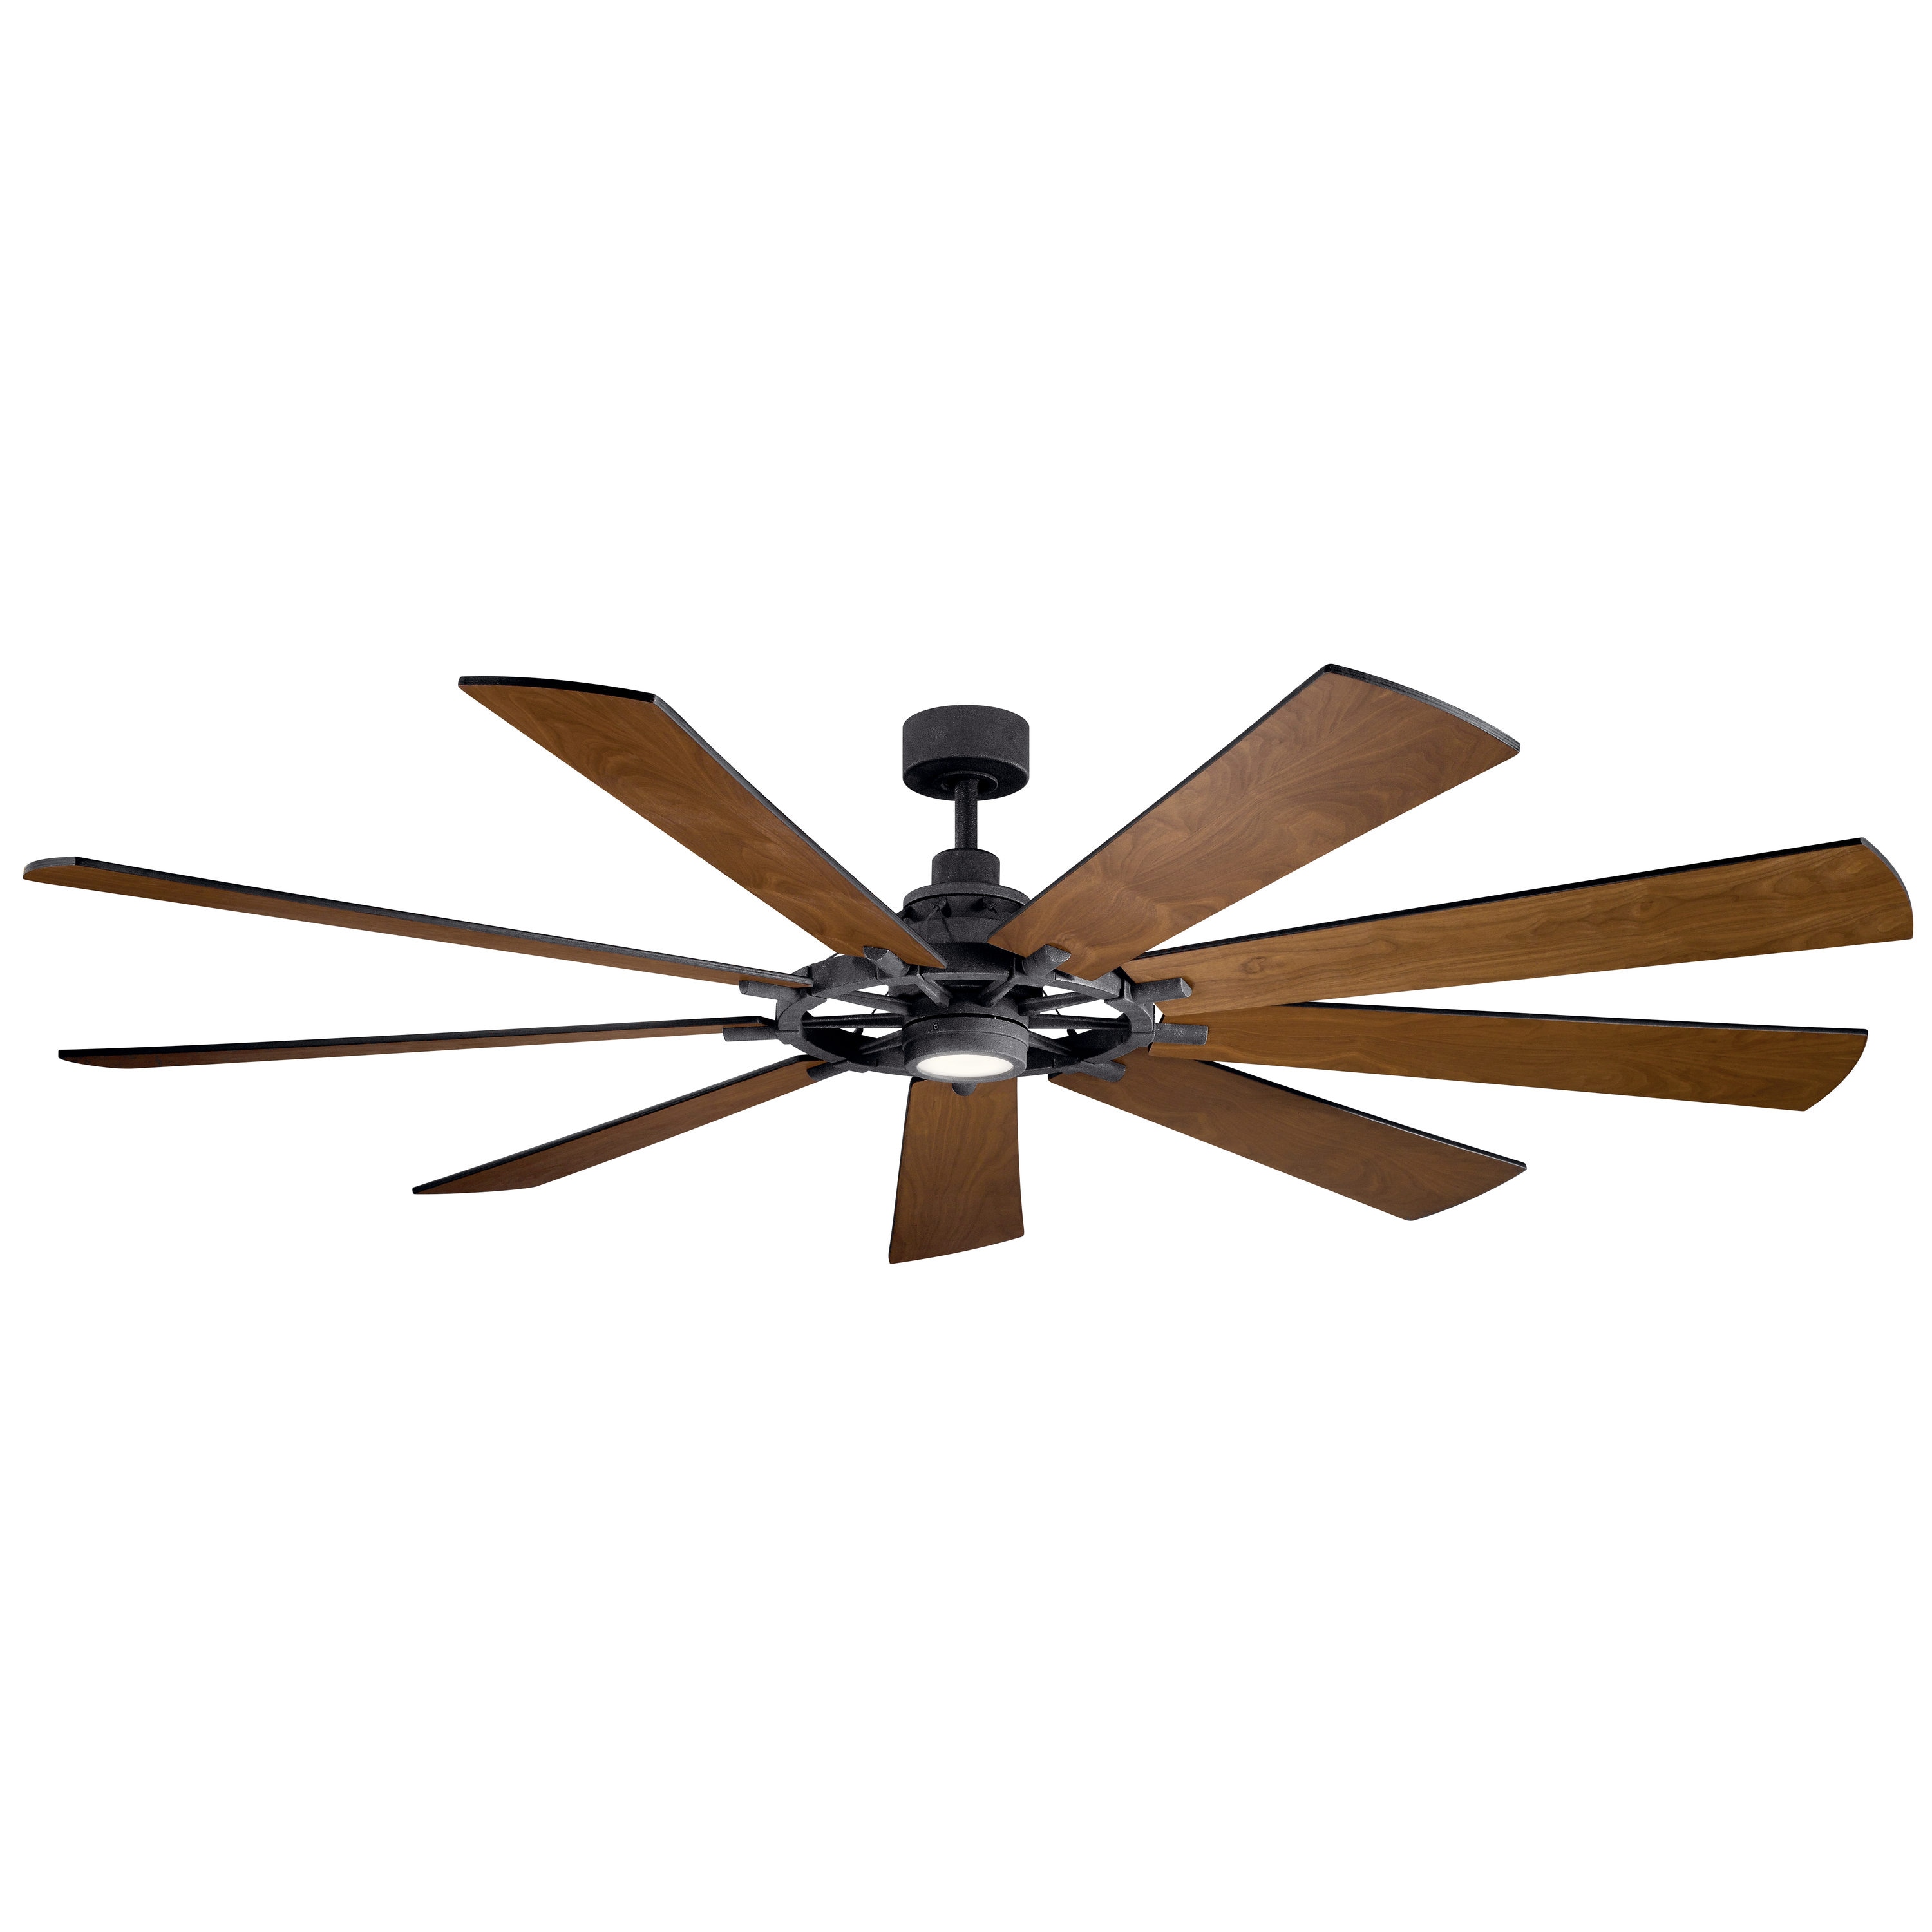 Kichler Gentry Xl 85 In Distressed, What Are The Best Outdoor Ceiling Fans With Lights